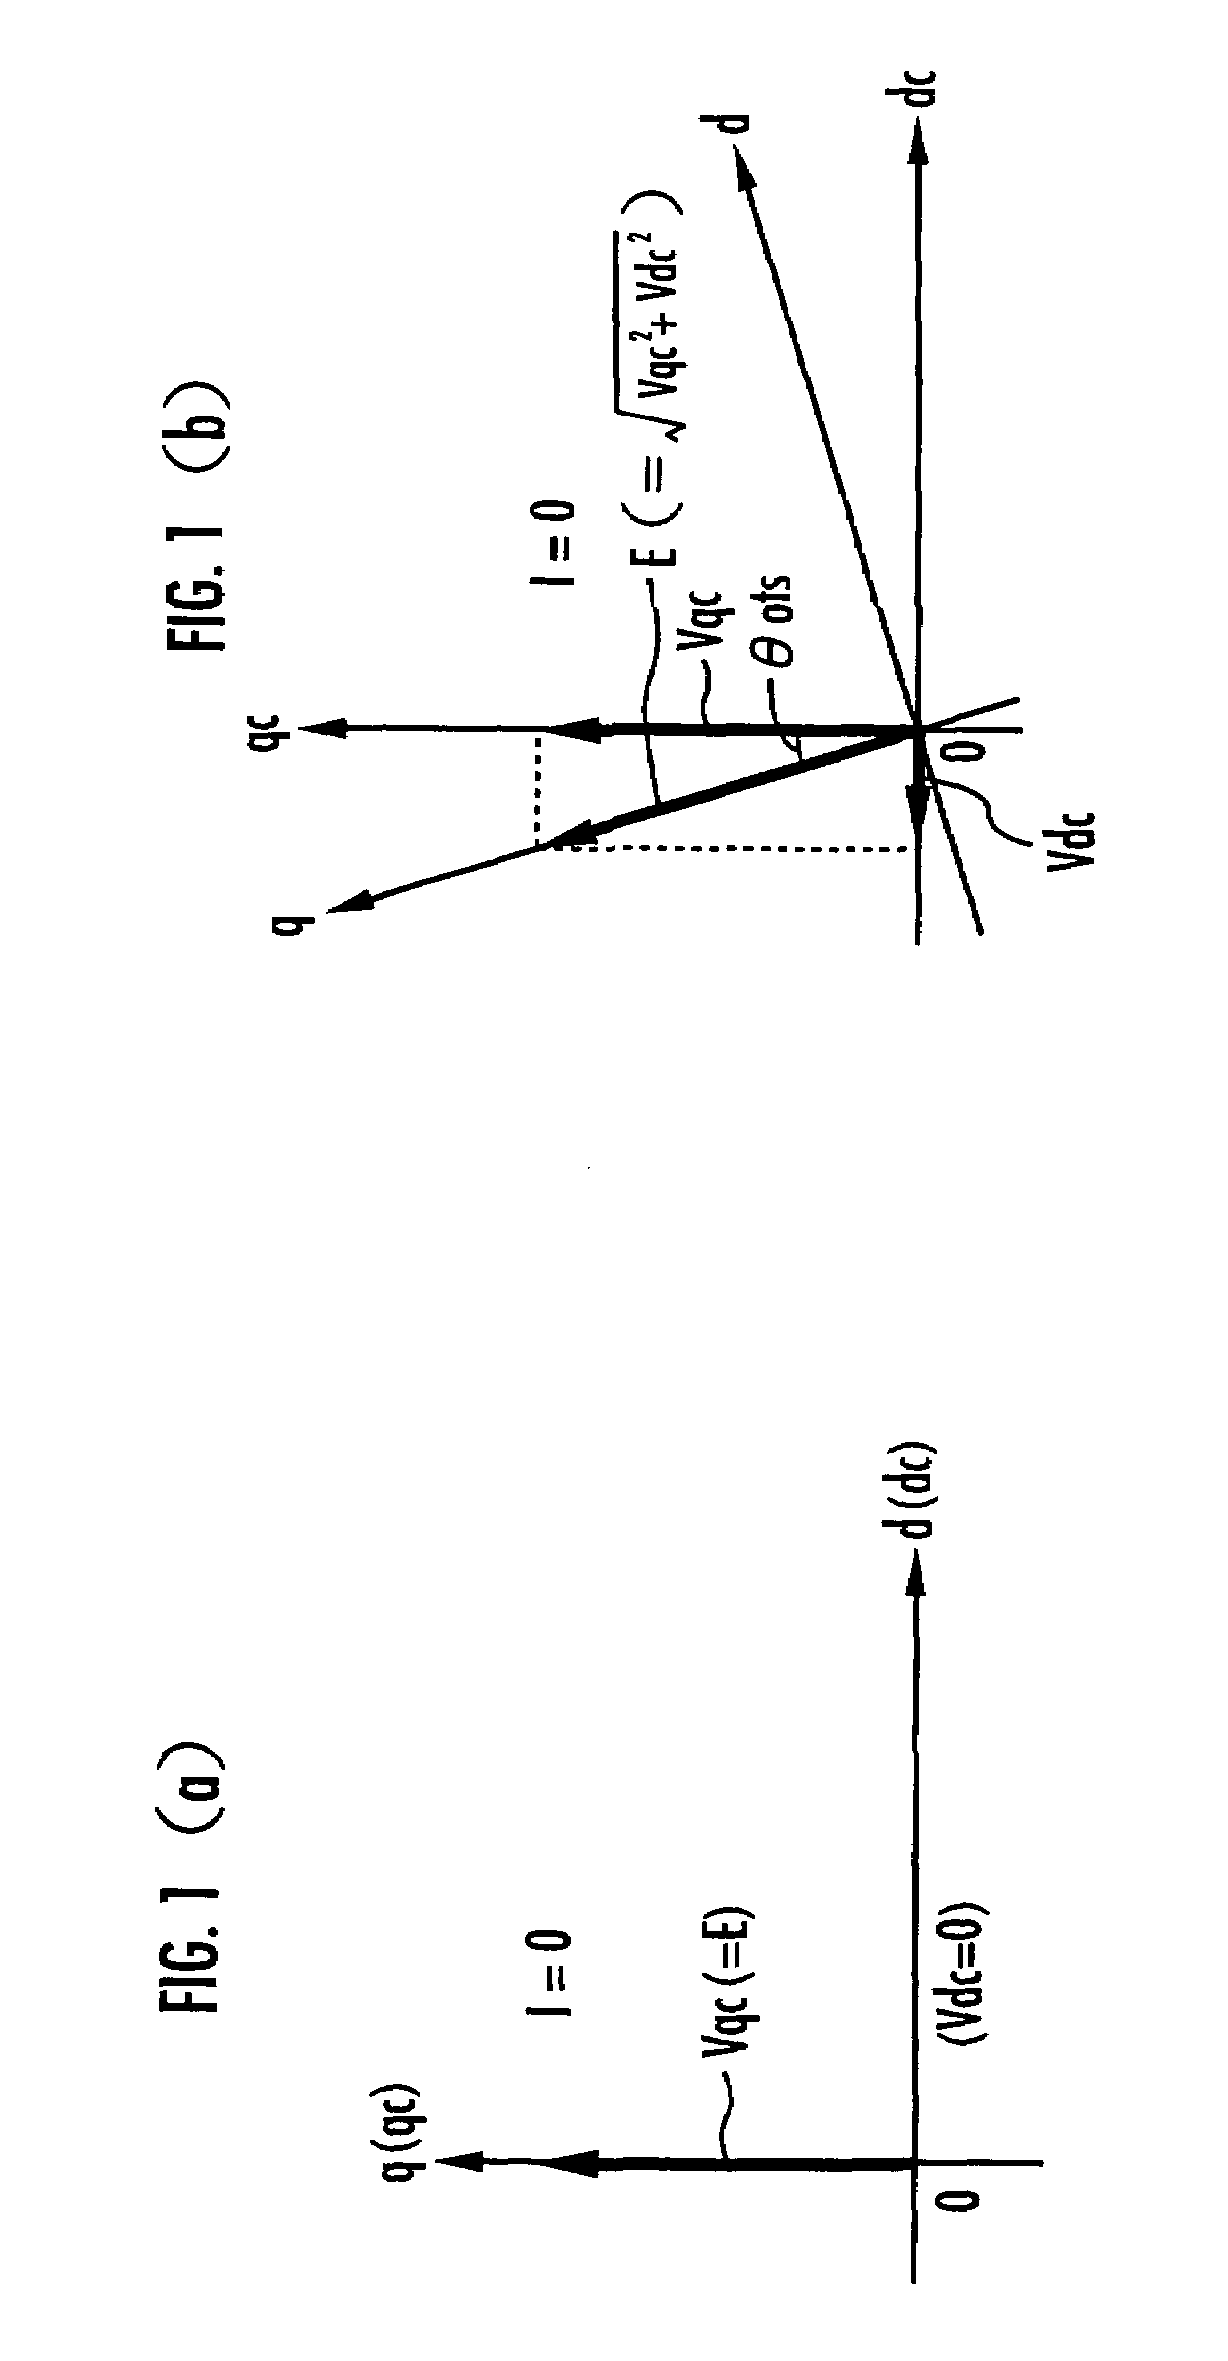 Apparatus for controlling permanent-magnet rotary machine